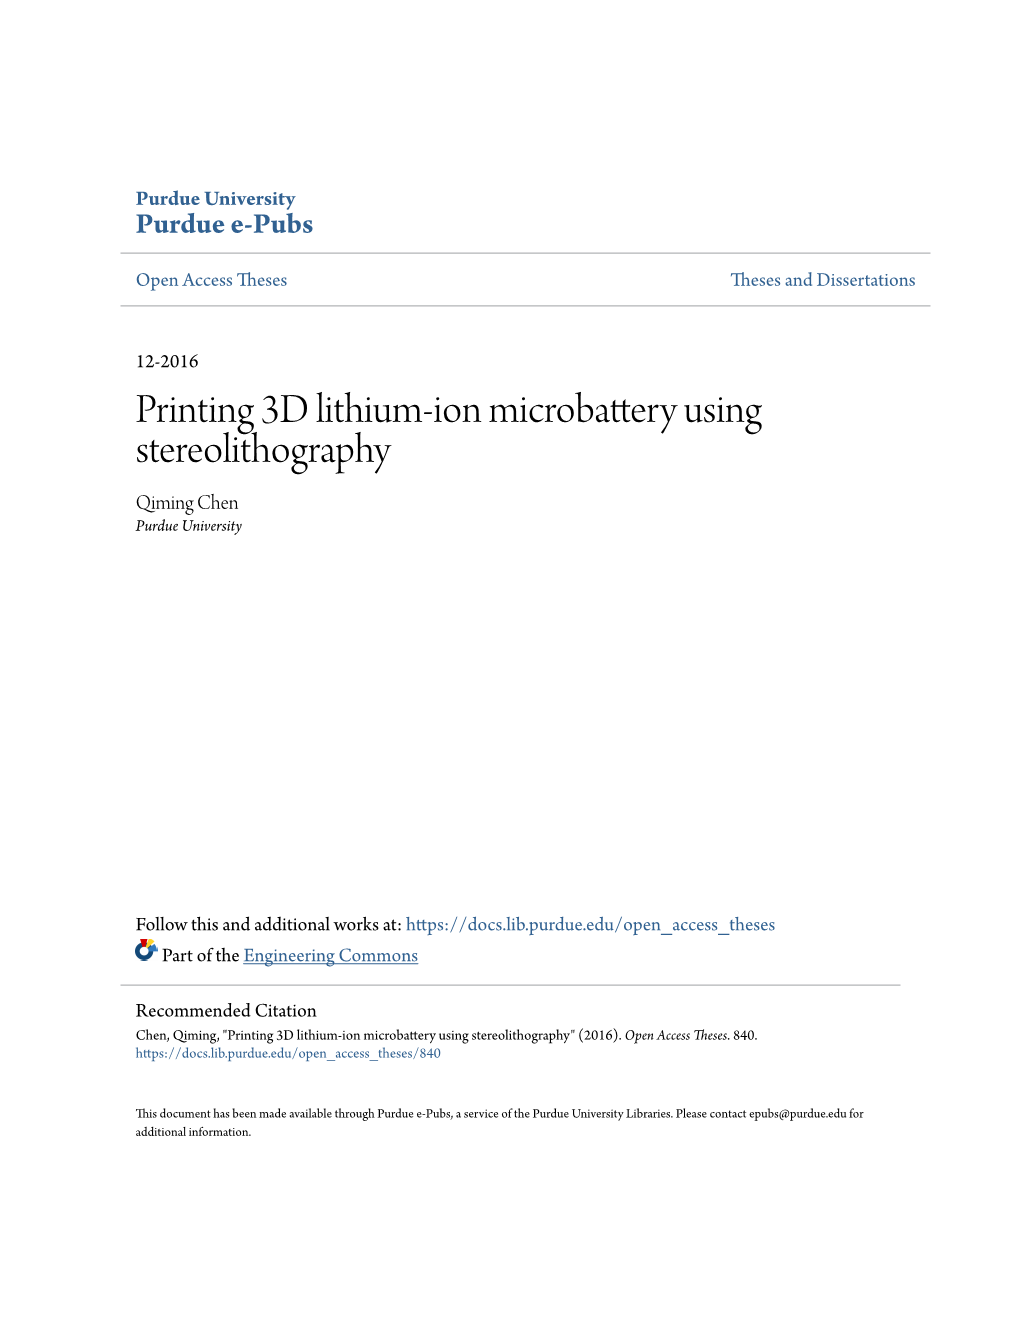 Printing 3D Lithium-Ion Microbattery Using Stereolithography Qiming Chen Purdue University